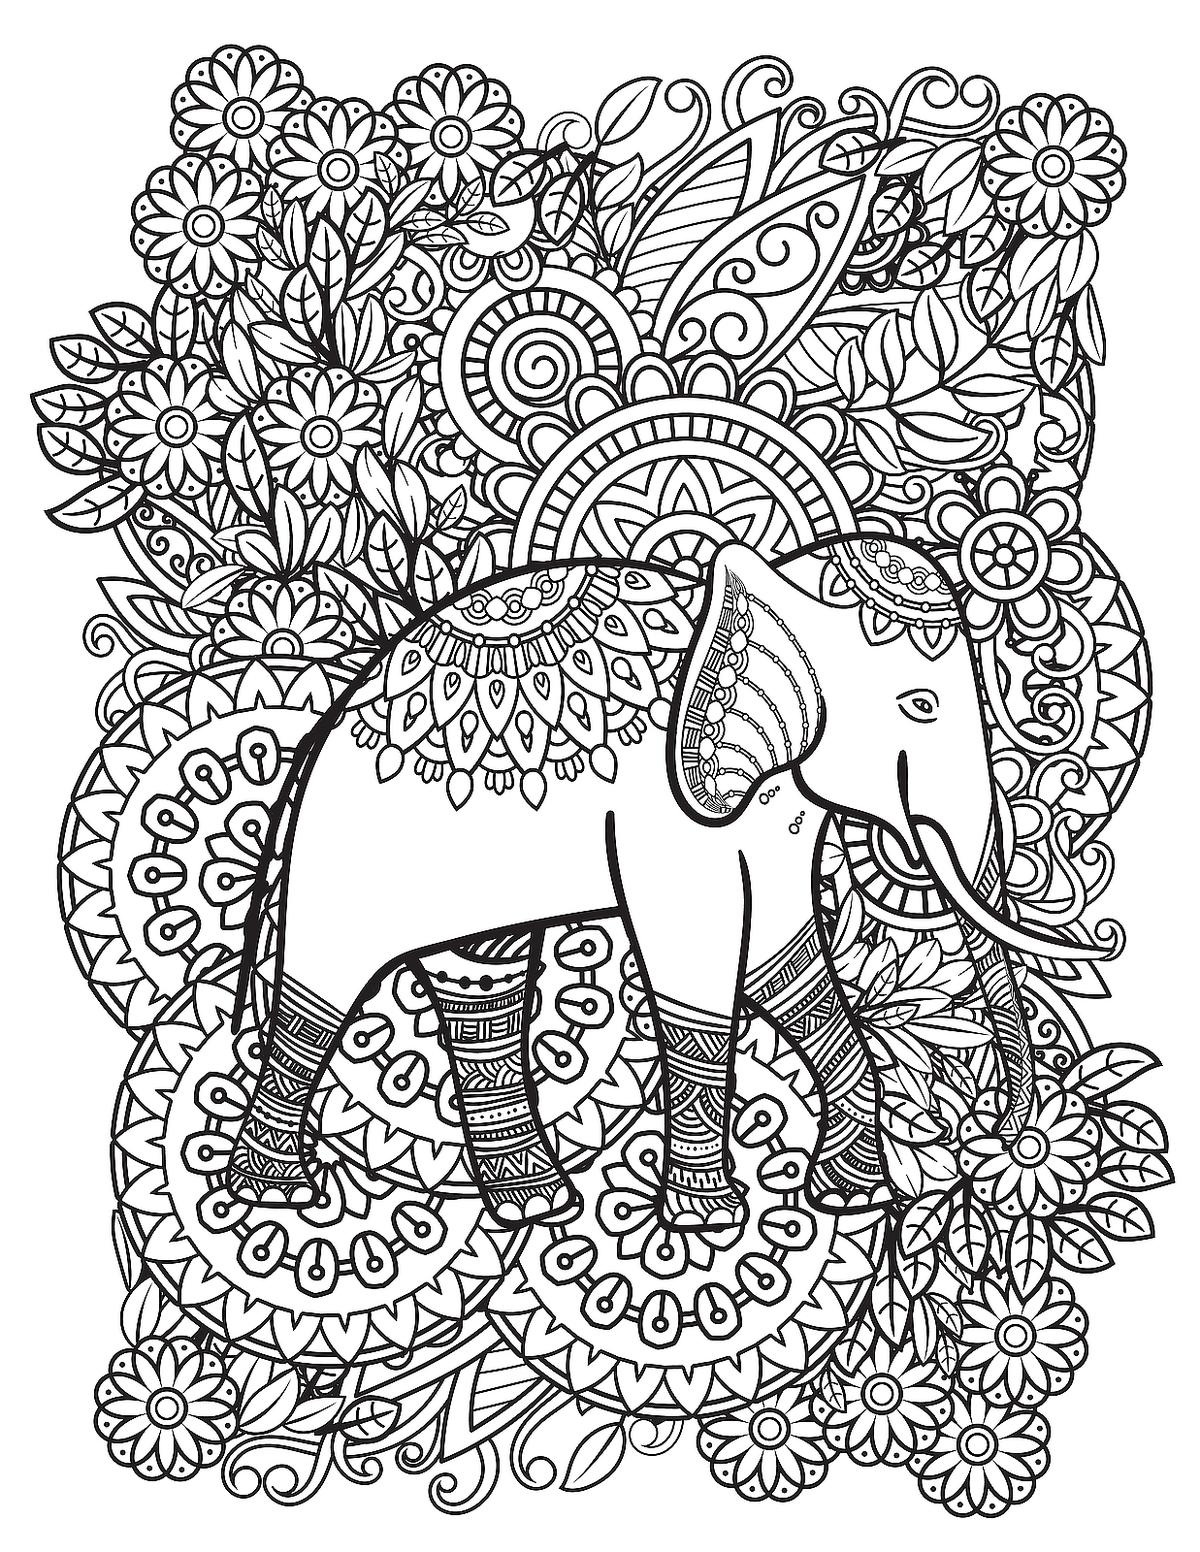 Elephant Coloring Pages: 12 Free & Fun Printable Elephant Coloring Pages  for Kids & Adults | Printables | 30Seconds Mom